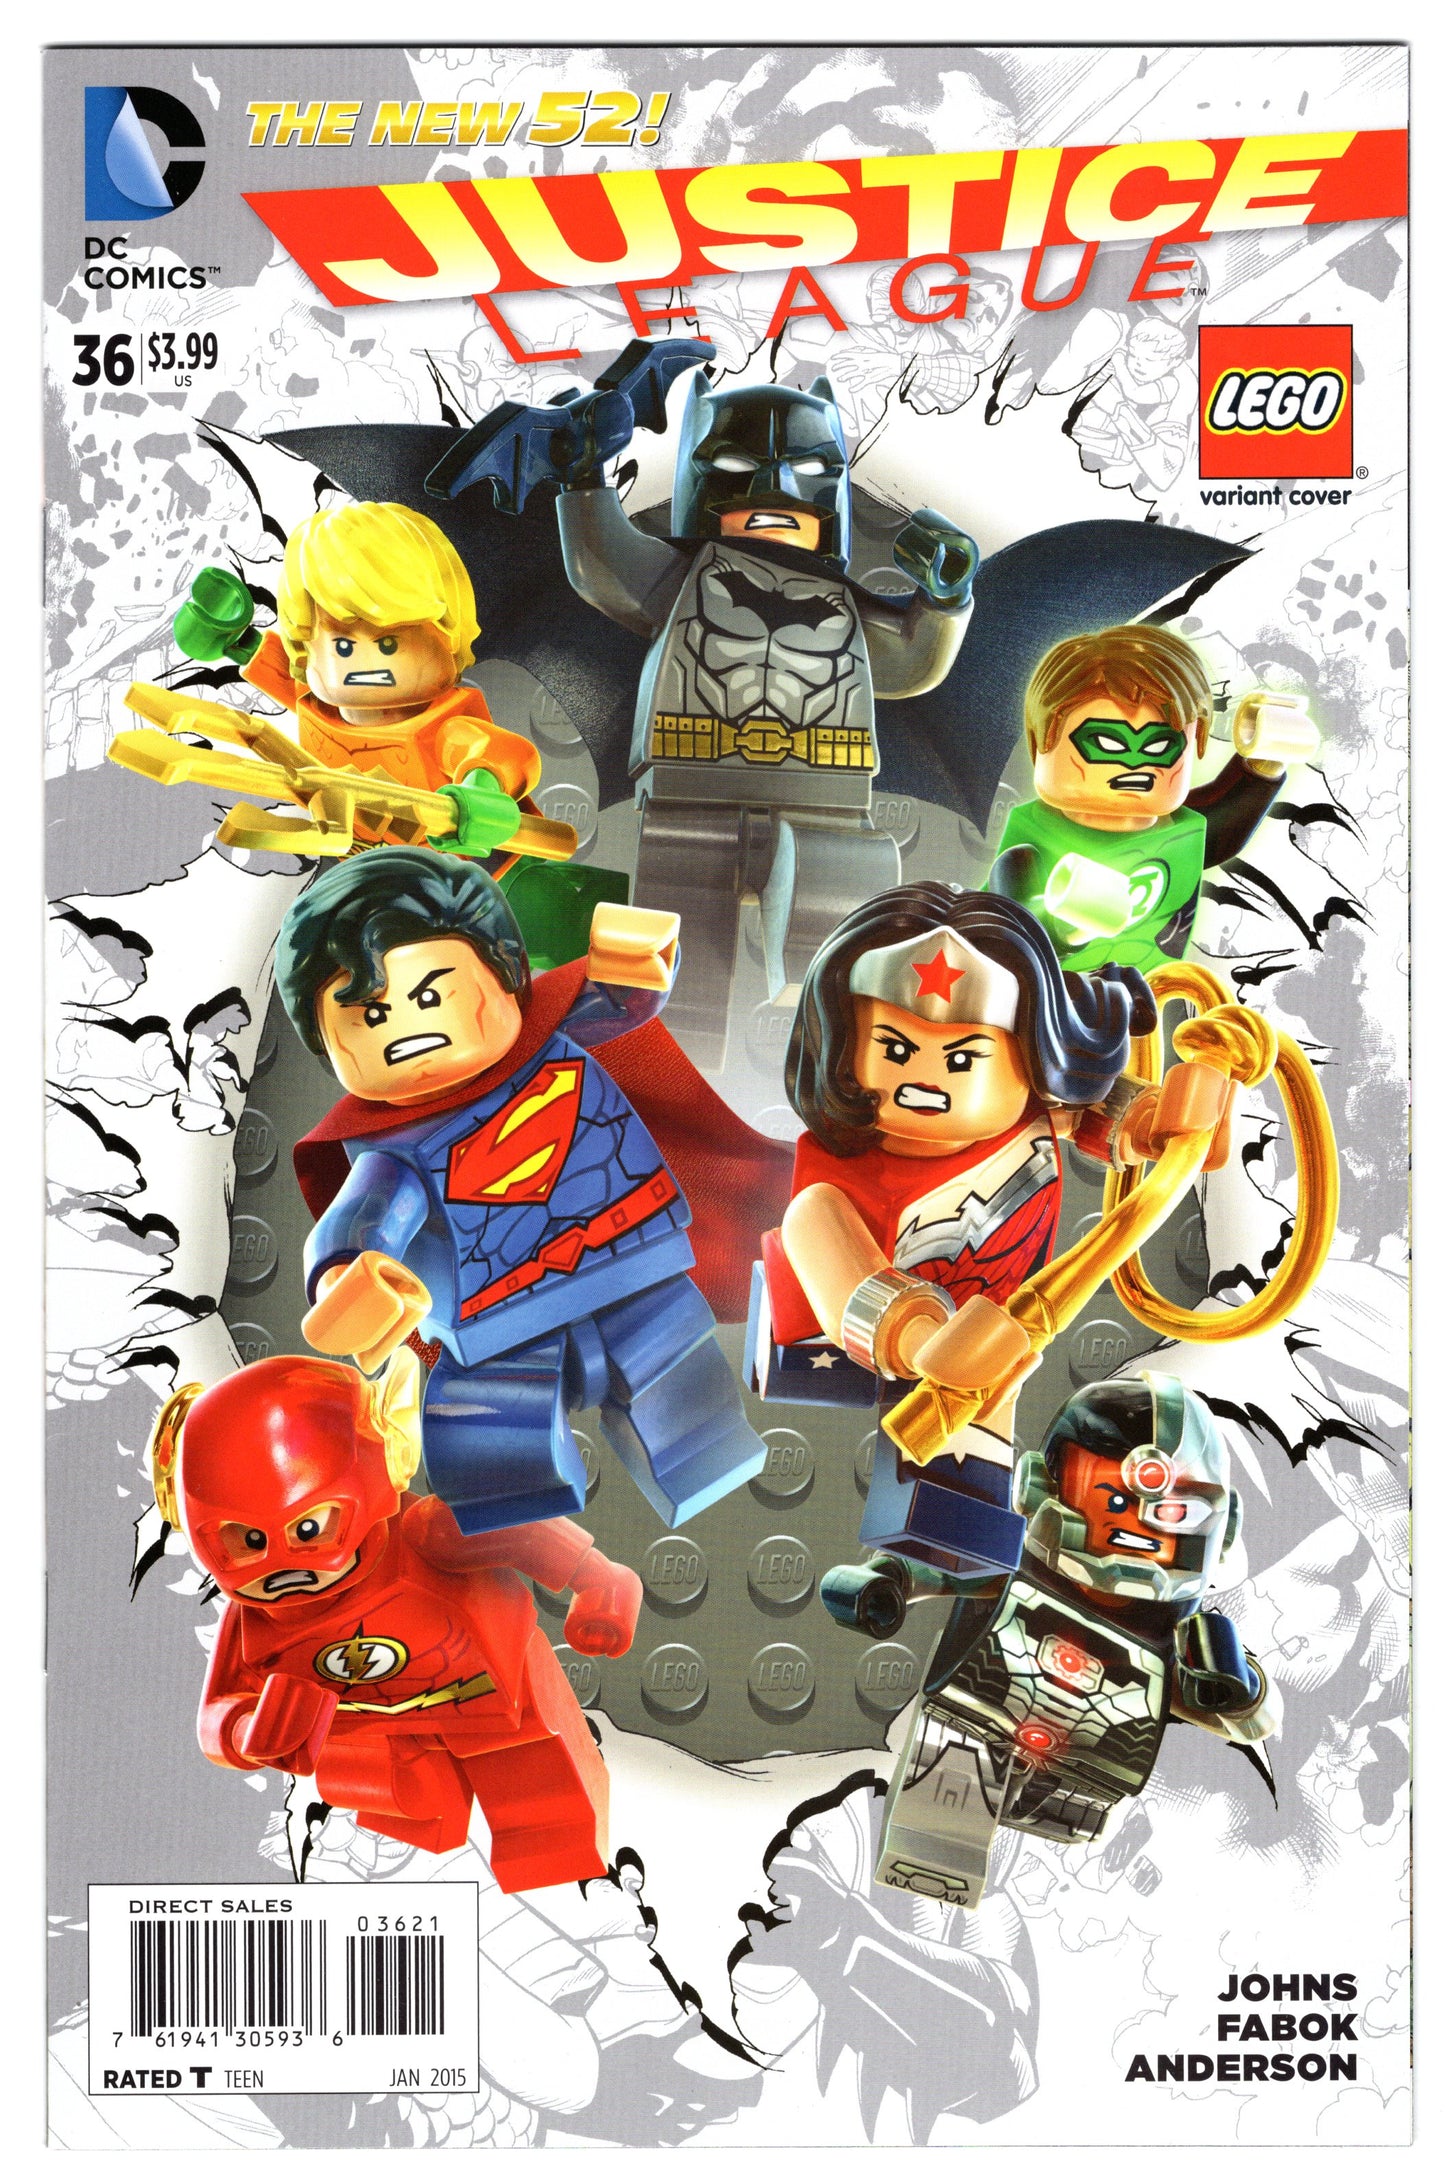 Justice League The New 52! - Issue #36 "LEGO EXCLUSIVE" (Jan. 2015 - DC Comics) NM+